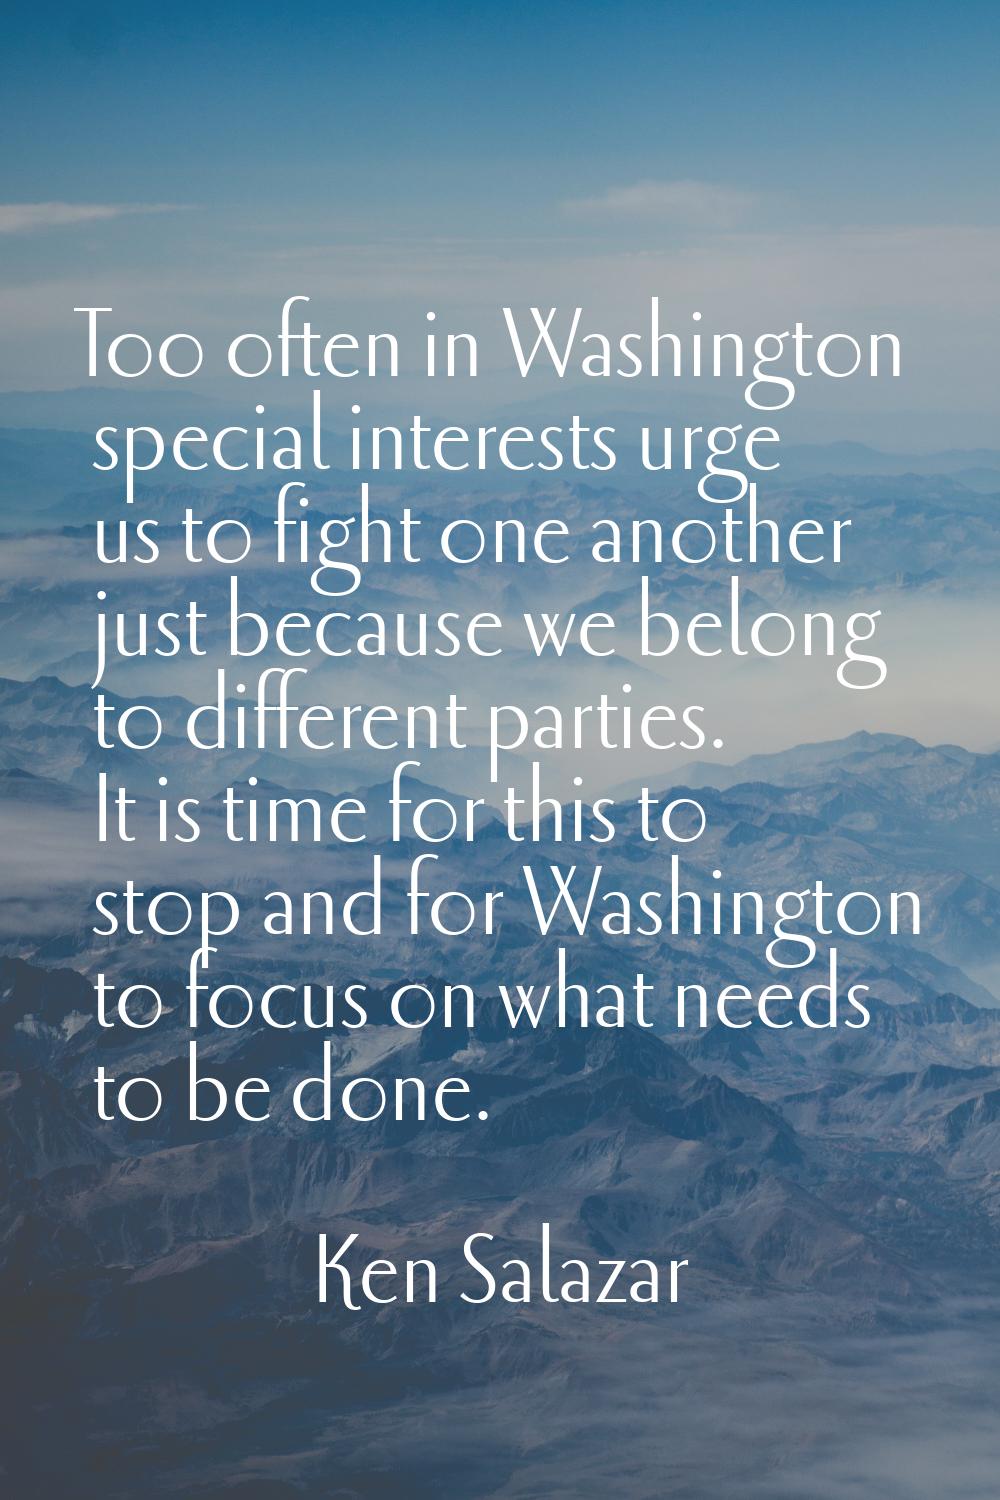 Too often in Washington special interests urge us to fight one another just because we belong to di